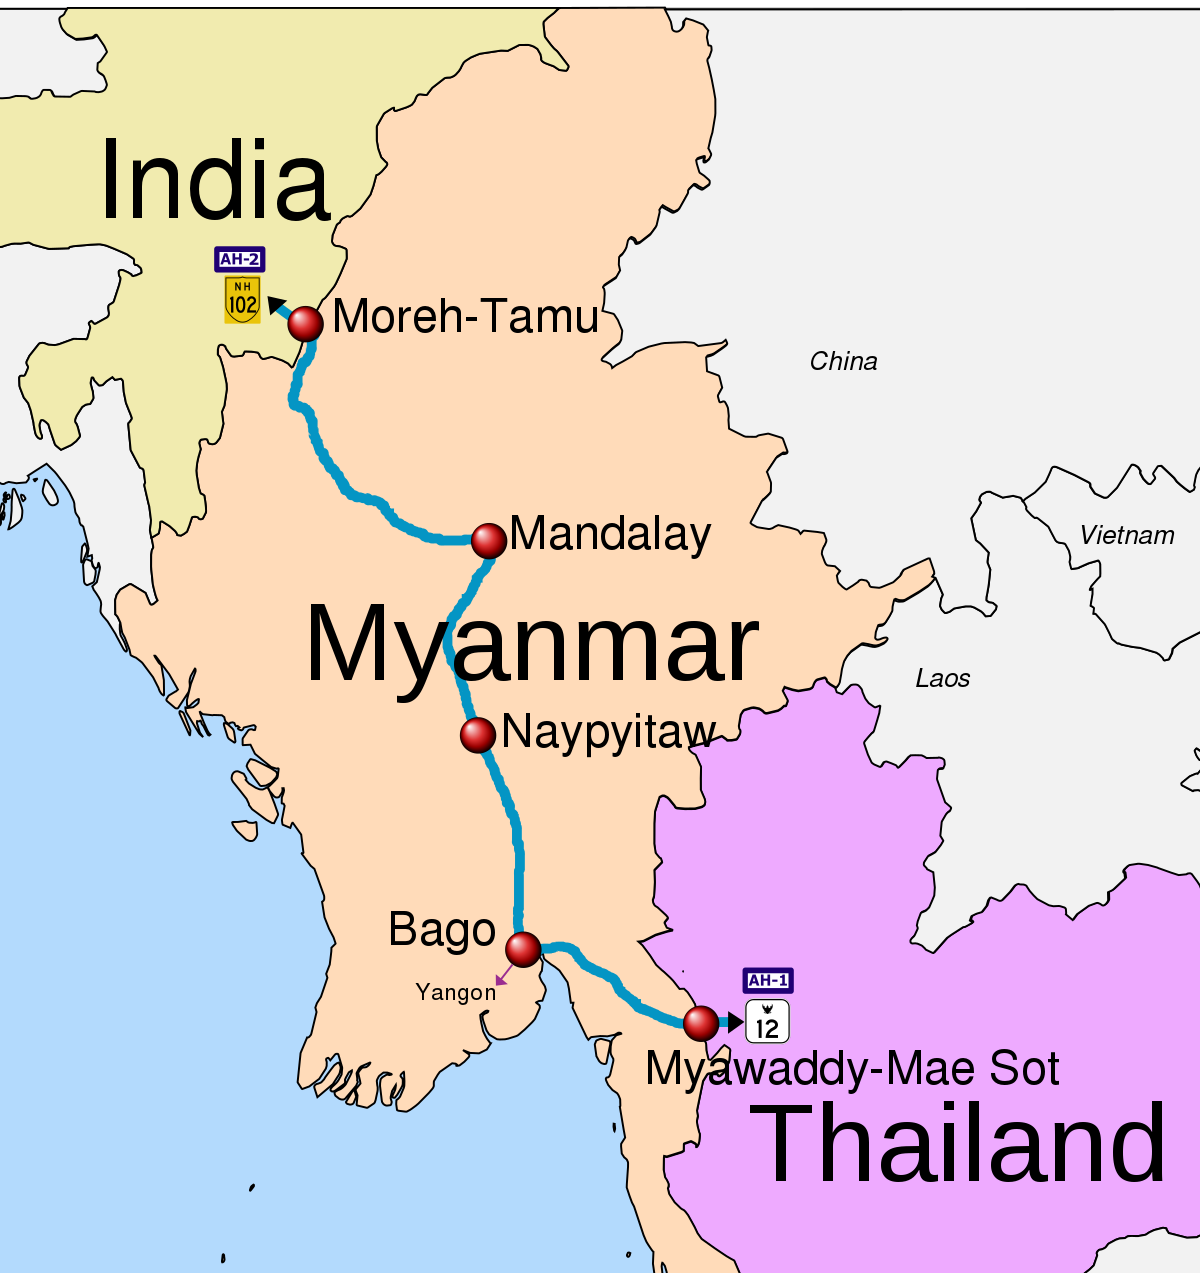 India–Myanmar–Thailand Trilateral Highway